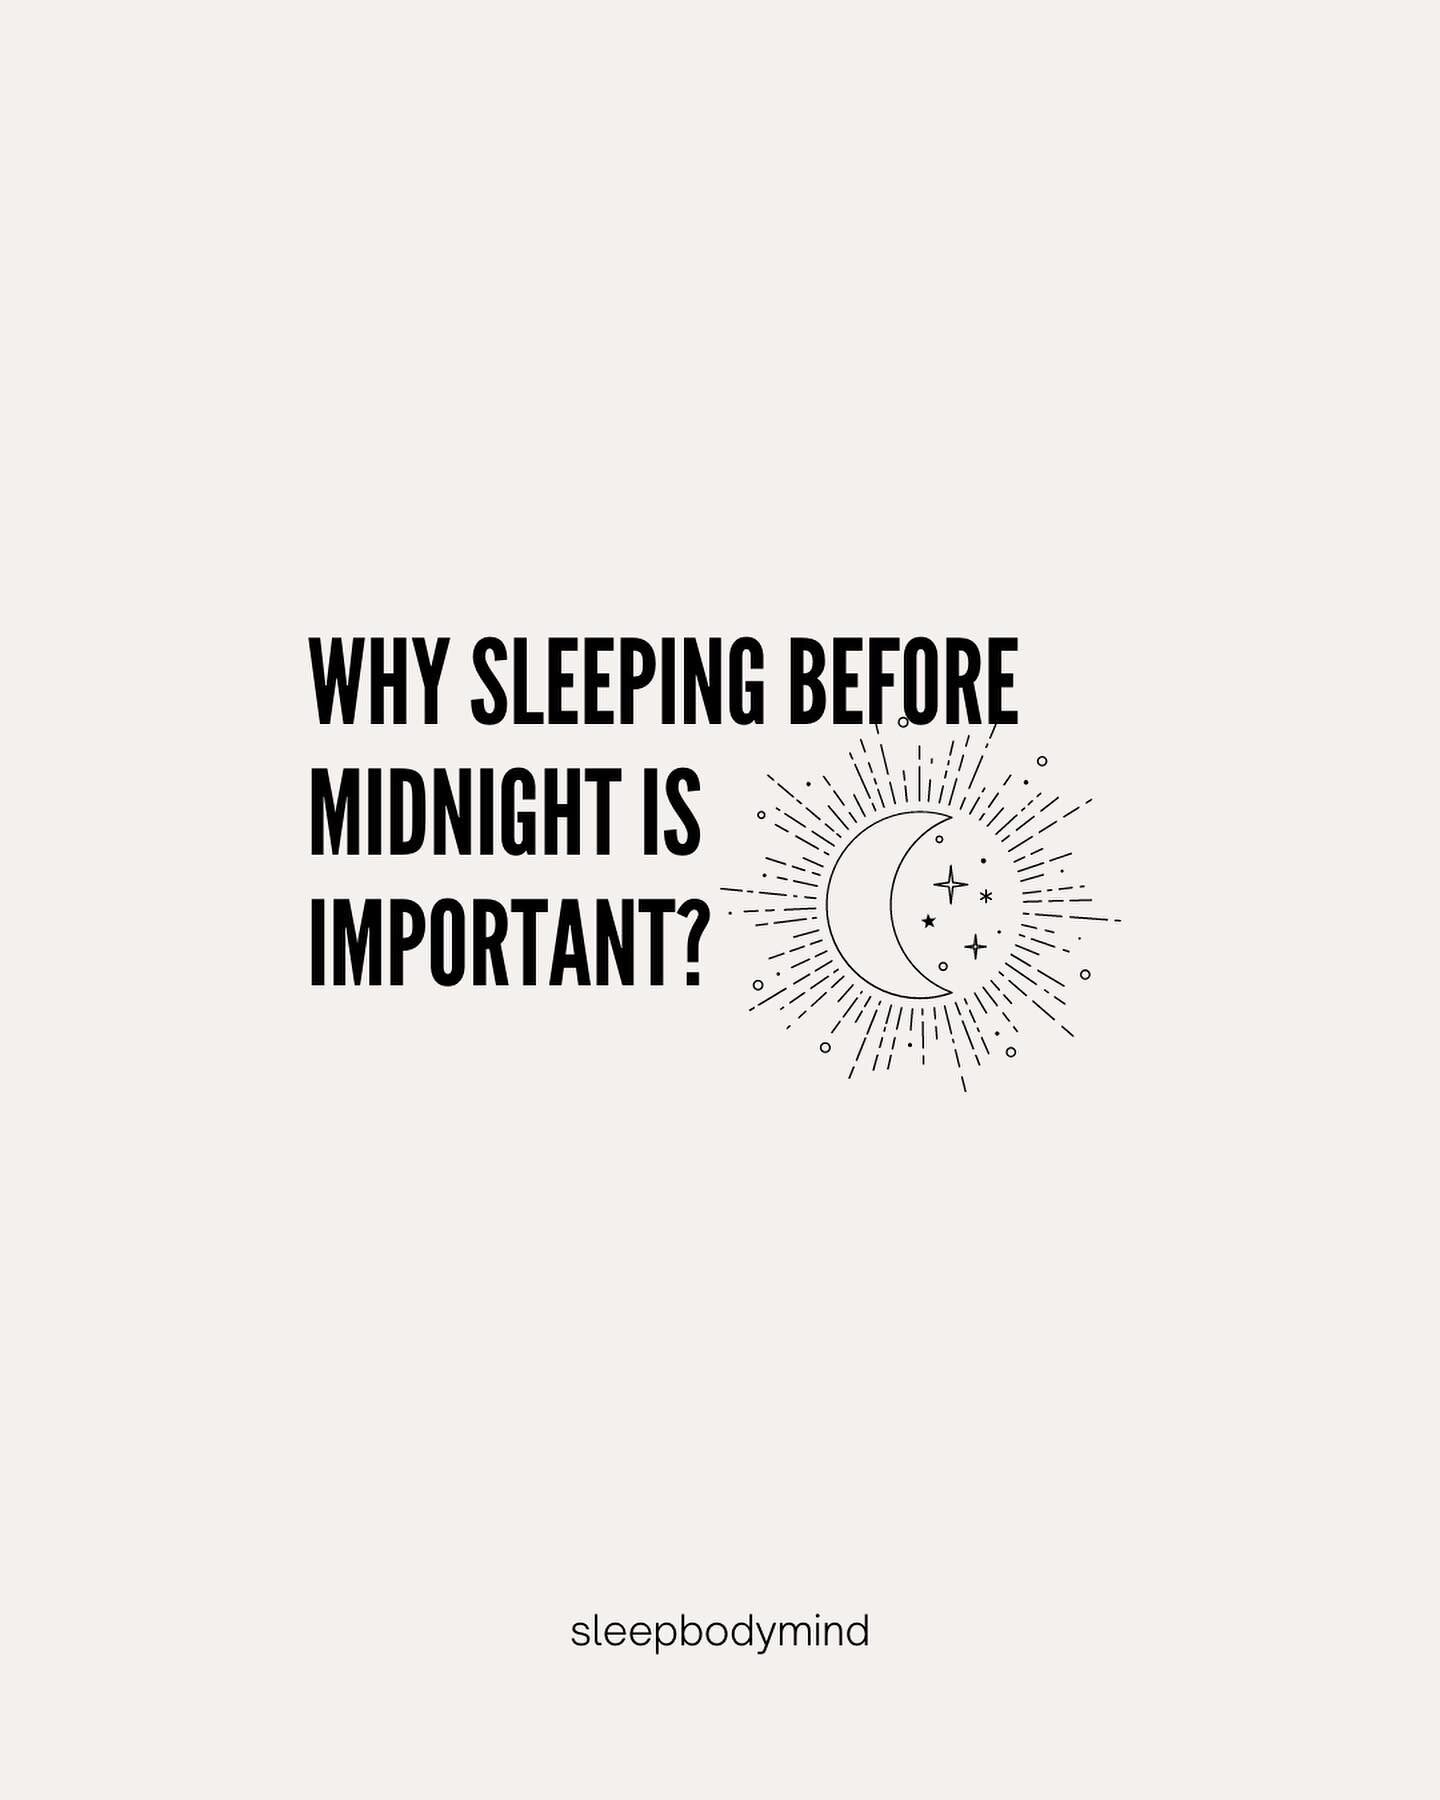 This one might be difficult for the night owls out there but if vou can squeeze in just one hour of sleep before midnight during the week that would be great 😁

#sleeptips 
#holisticsleepcoach 
#holistique 
#sommeil 
#mieuxdormir 
#holisticsleep 
#h